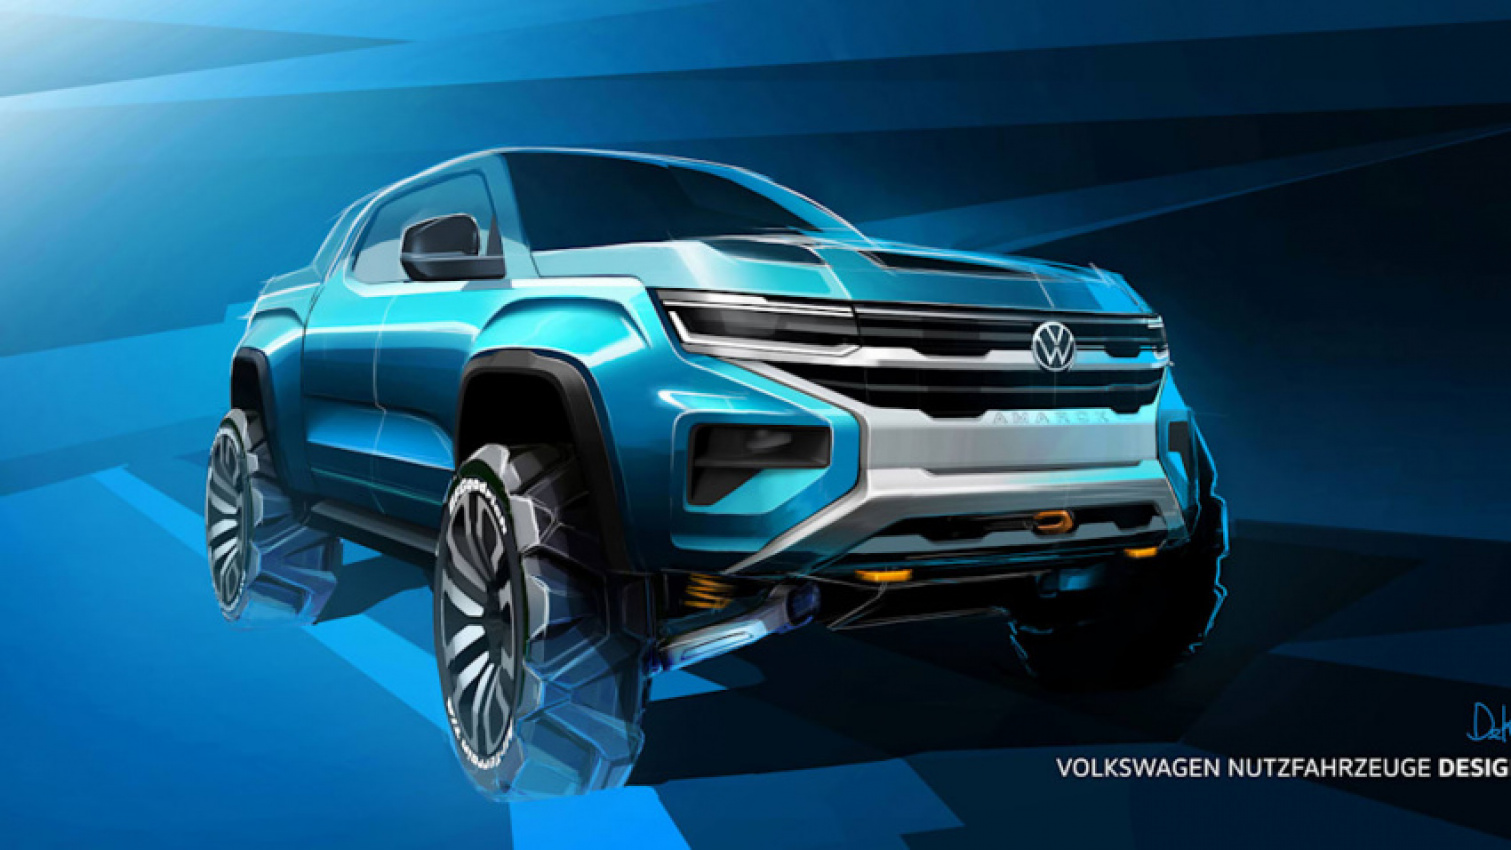 autos, cars, design/style, ford, ford ranger, off-road vehicles, truck, volkswagen, ford ranger-based vw amarok previewed with brawnier design